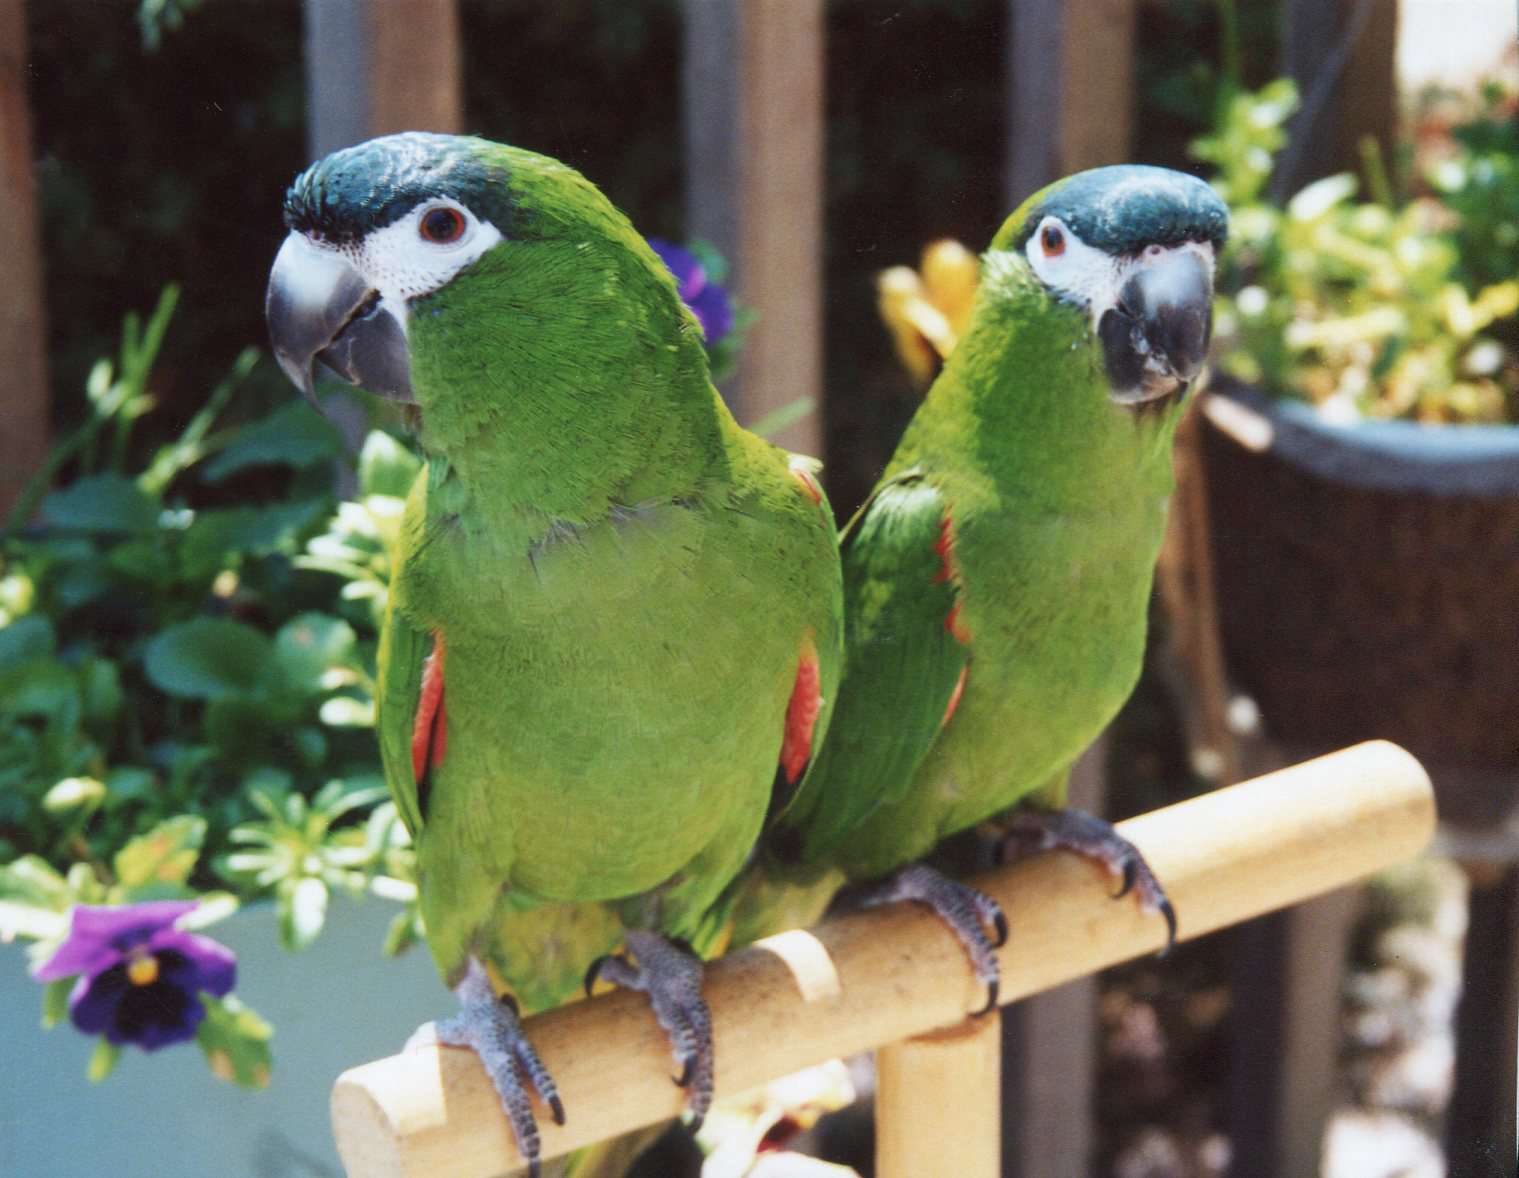 Two green Hahn's macaws sitting on a ledge.